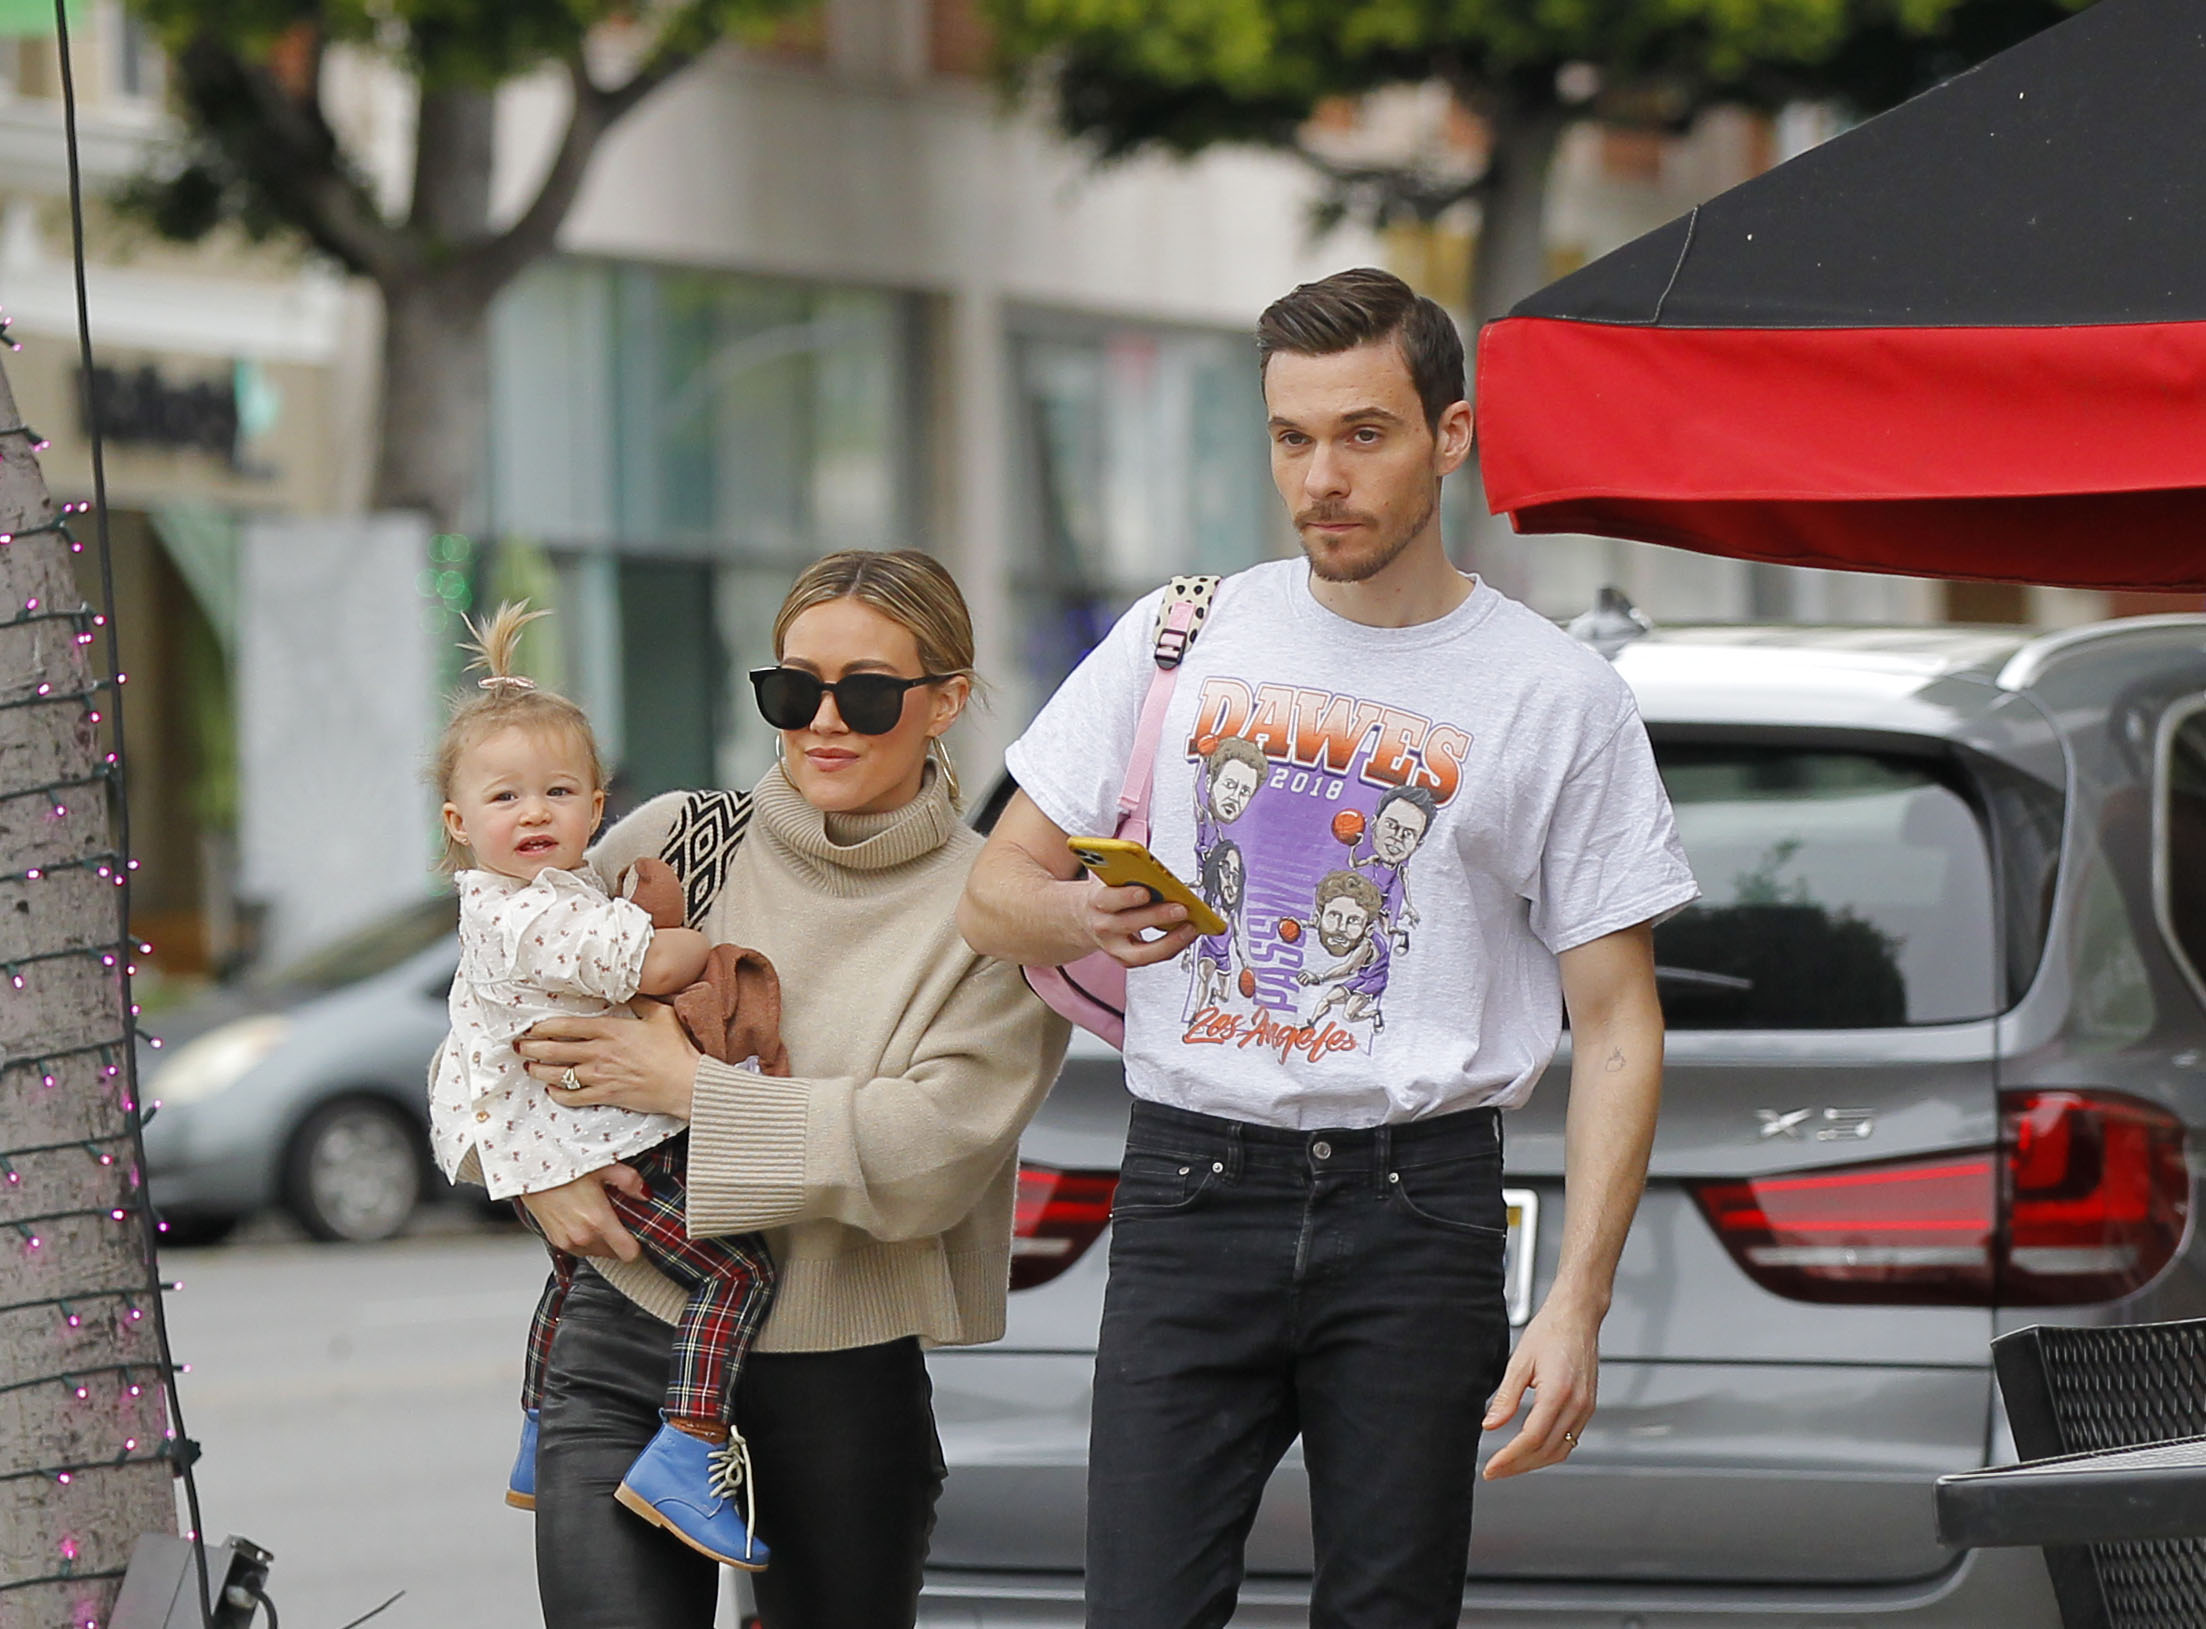 Hilary Duff out for lunch in Beverly Hills